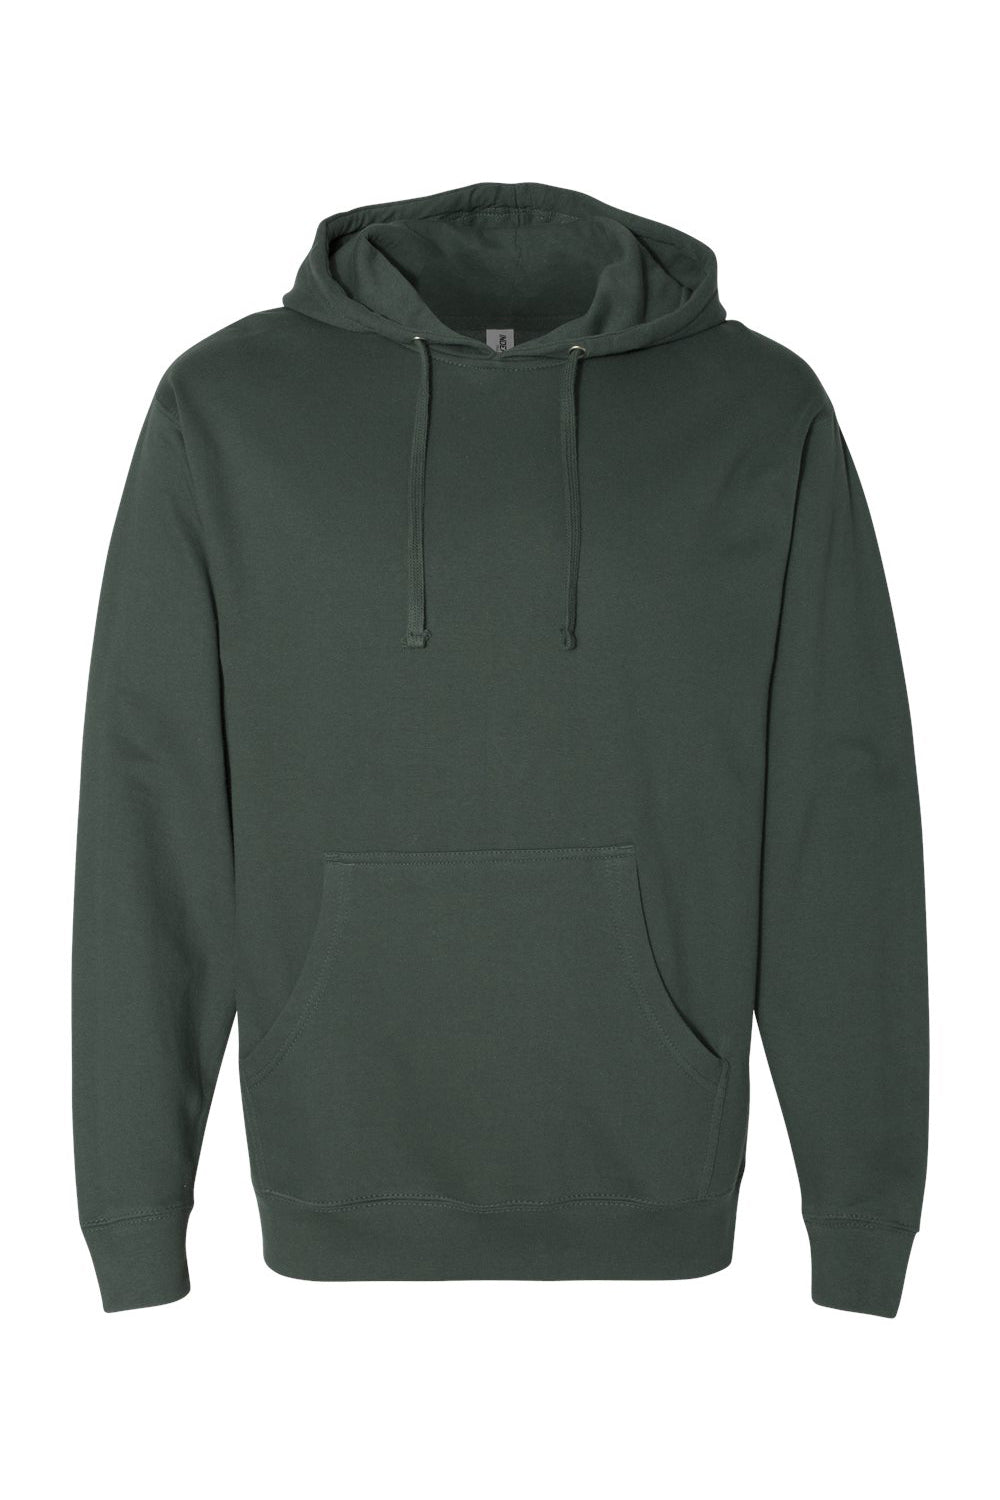 Independent Trading Co. SS4500 Mens Hooded Sweatshirt Hoodie Alpine Green Flat Front